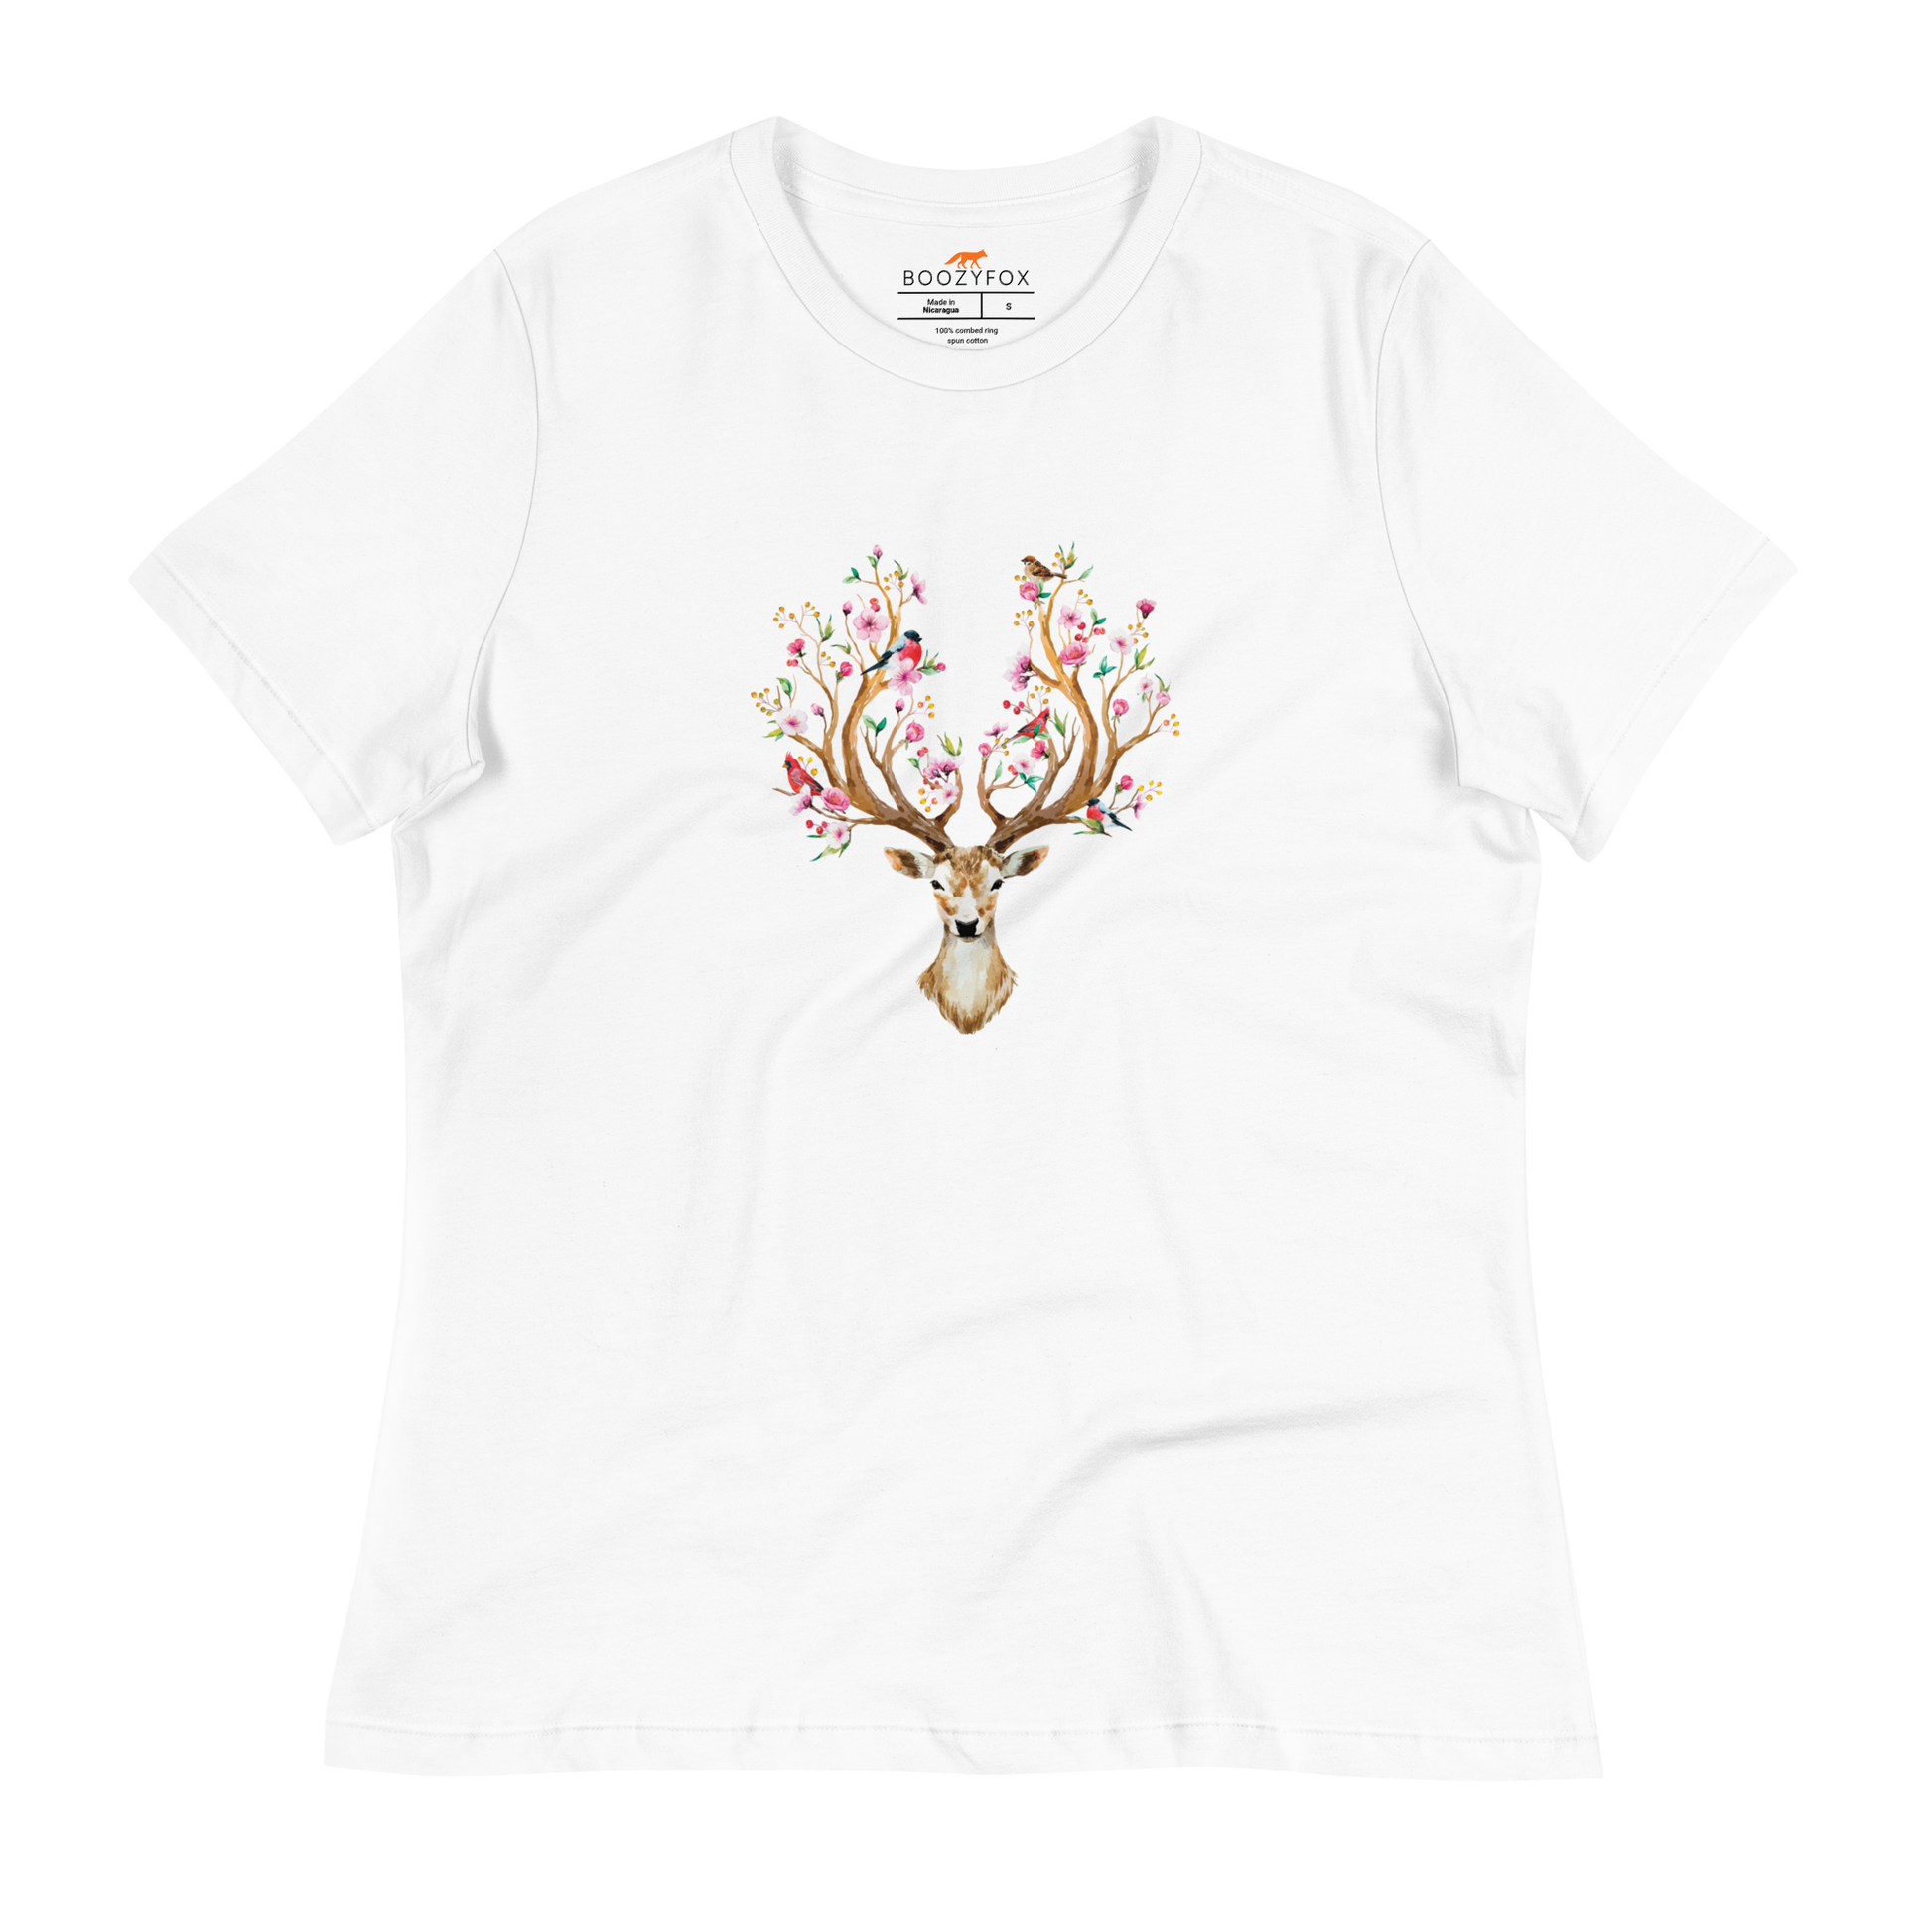 Women's relaxed white Deer t-shirt featuring an eye-catching Floral Red Deer graphic on the chest - Women's Graphic Deer Tees - Boozy Fox